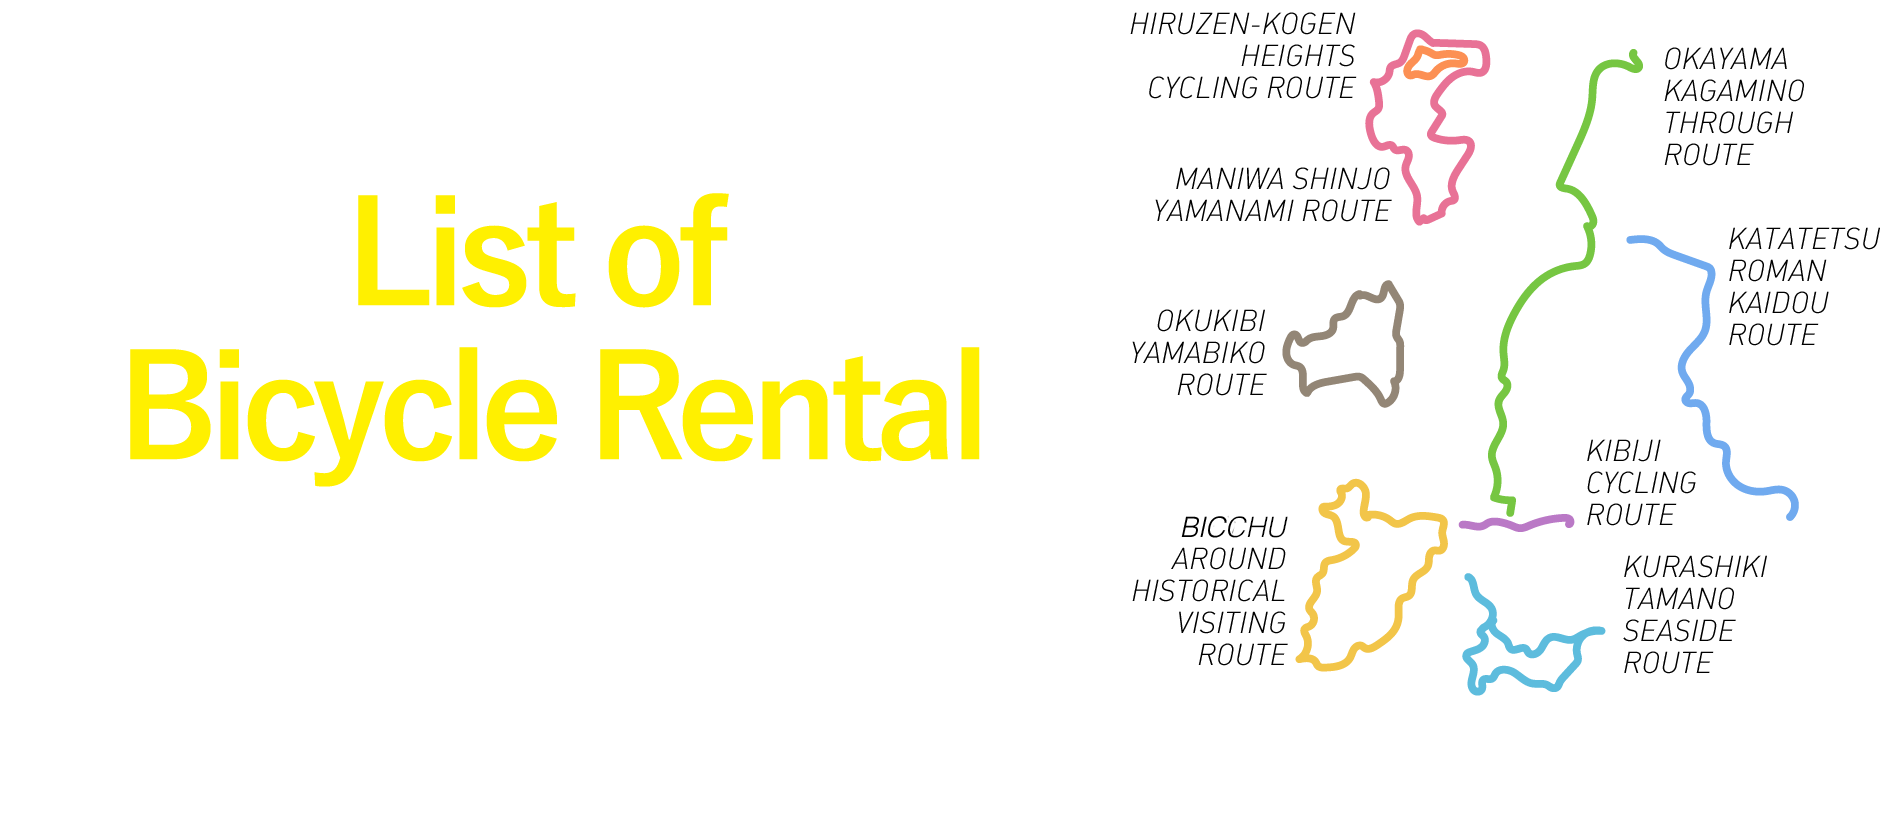 HARE IRO CYCLING OKAYAMA The Best Cycling Routes in Okayama Prefecture List of Bicycle Rental Shops offering bicycle rentals!